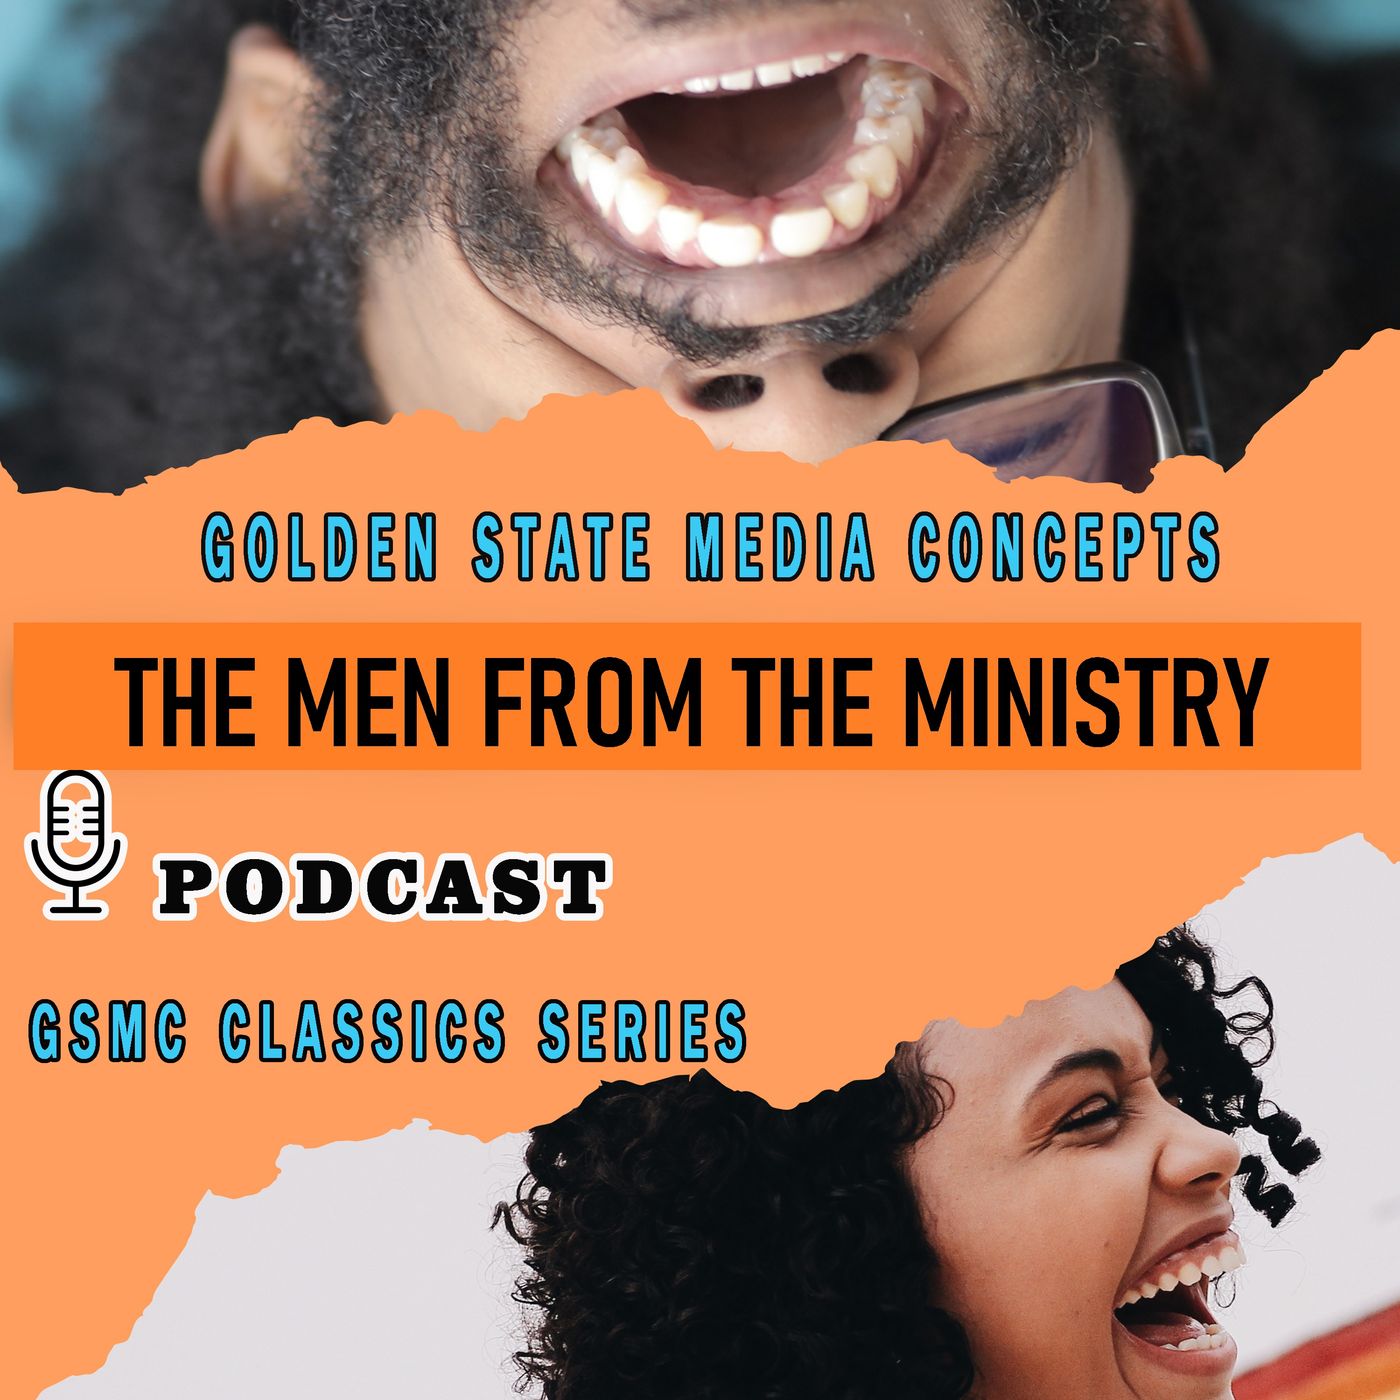 GSMC Classics: The Men from the Ministry Episode 111: A Slight Case Of Demolition